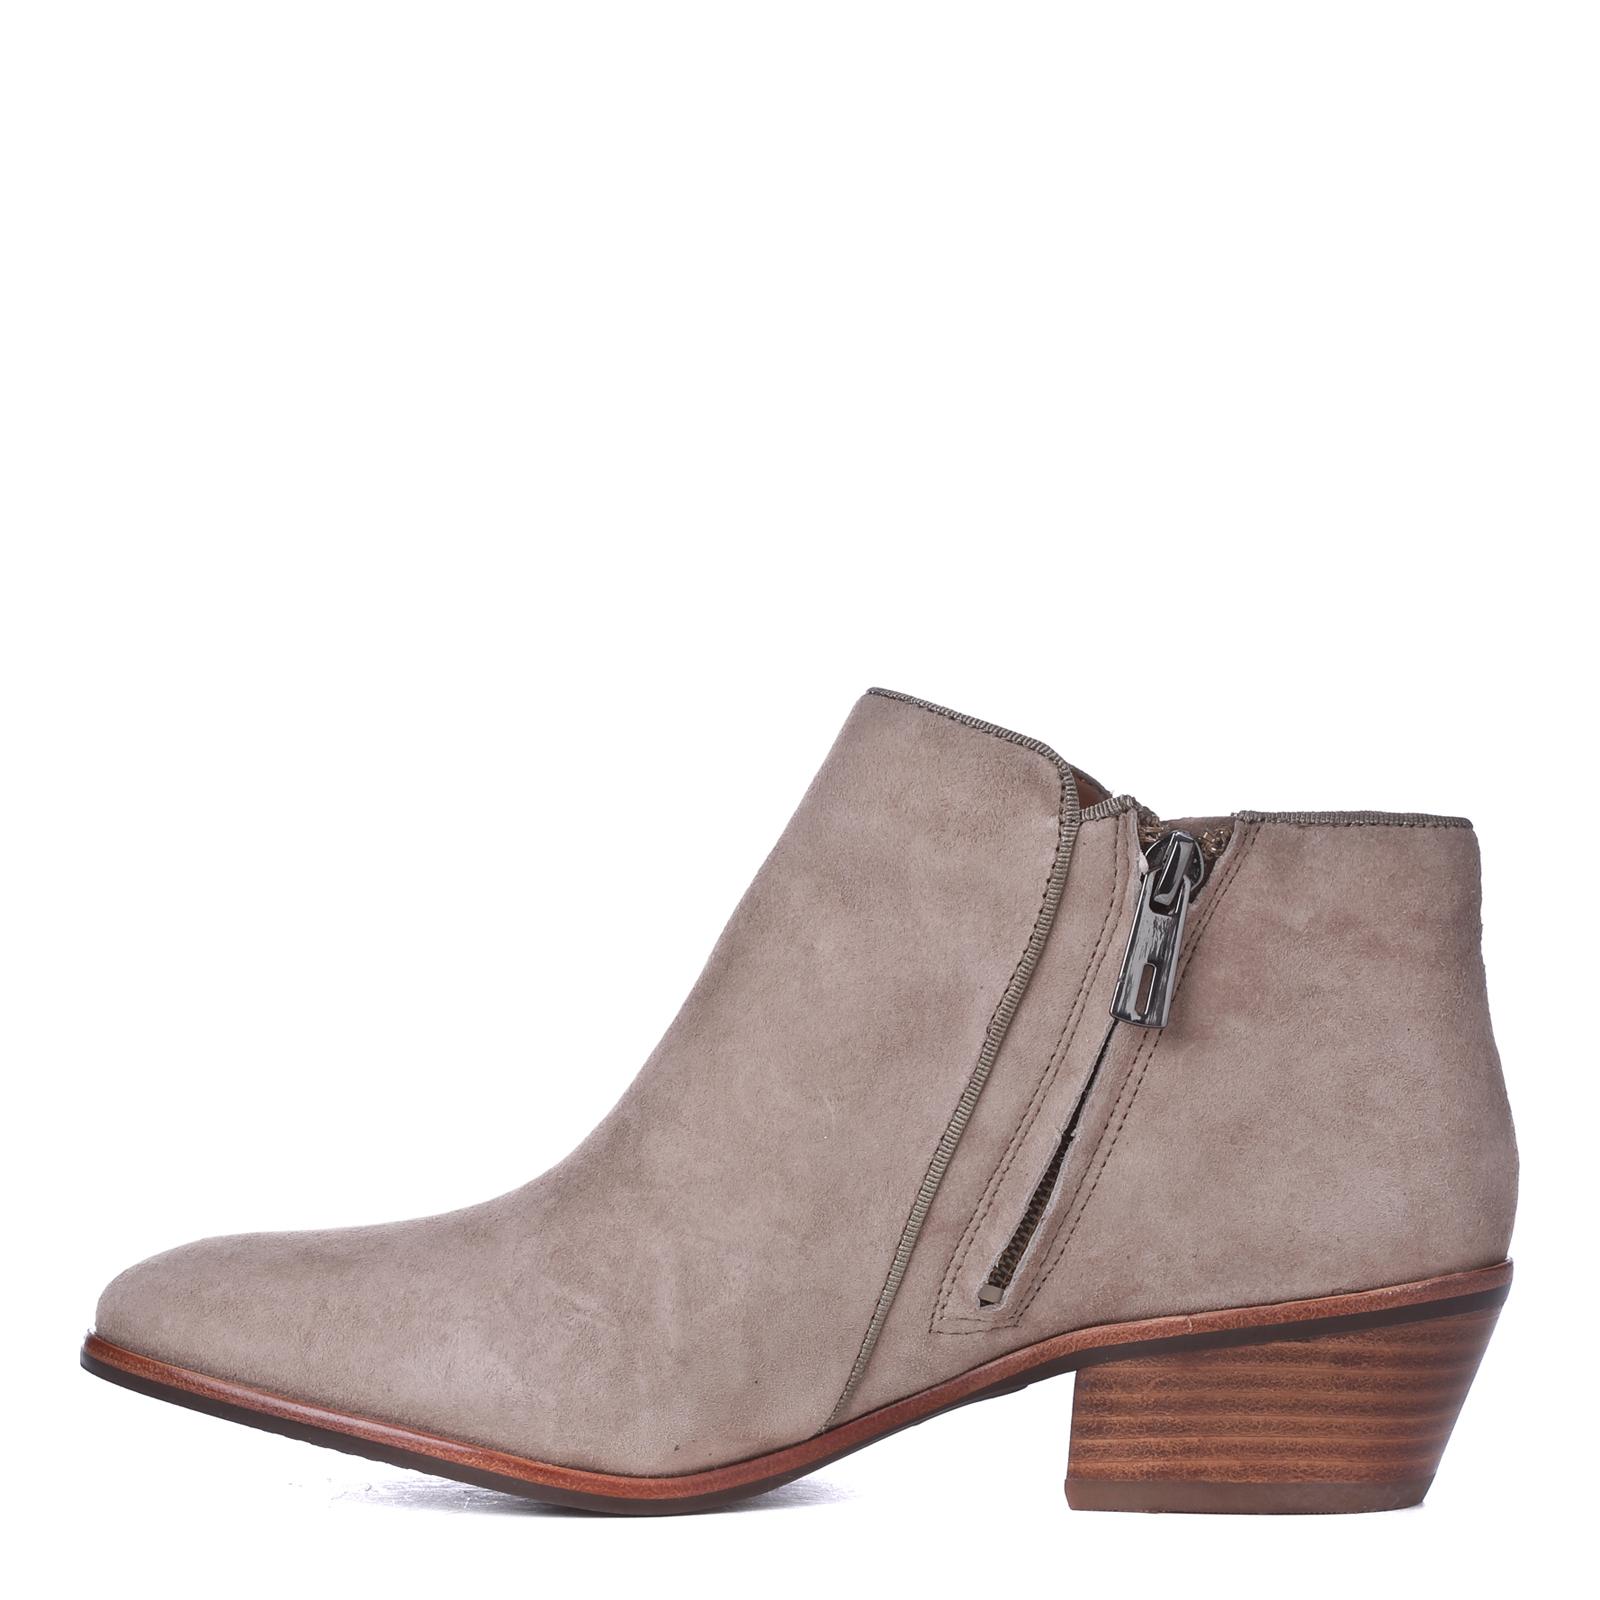 Beige Suede Low-Rise Ankle Boots 4.5cm Heel - BrandAlley